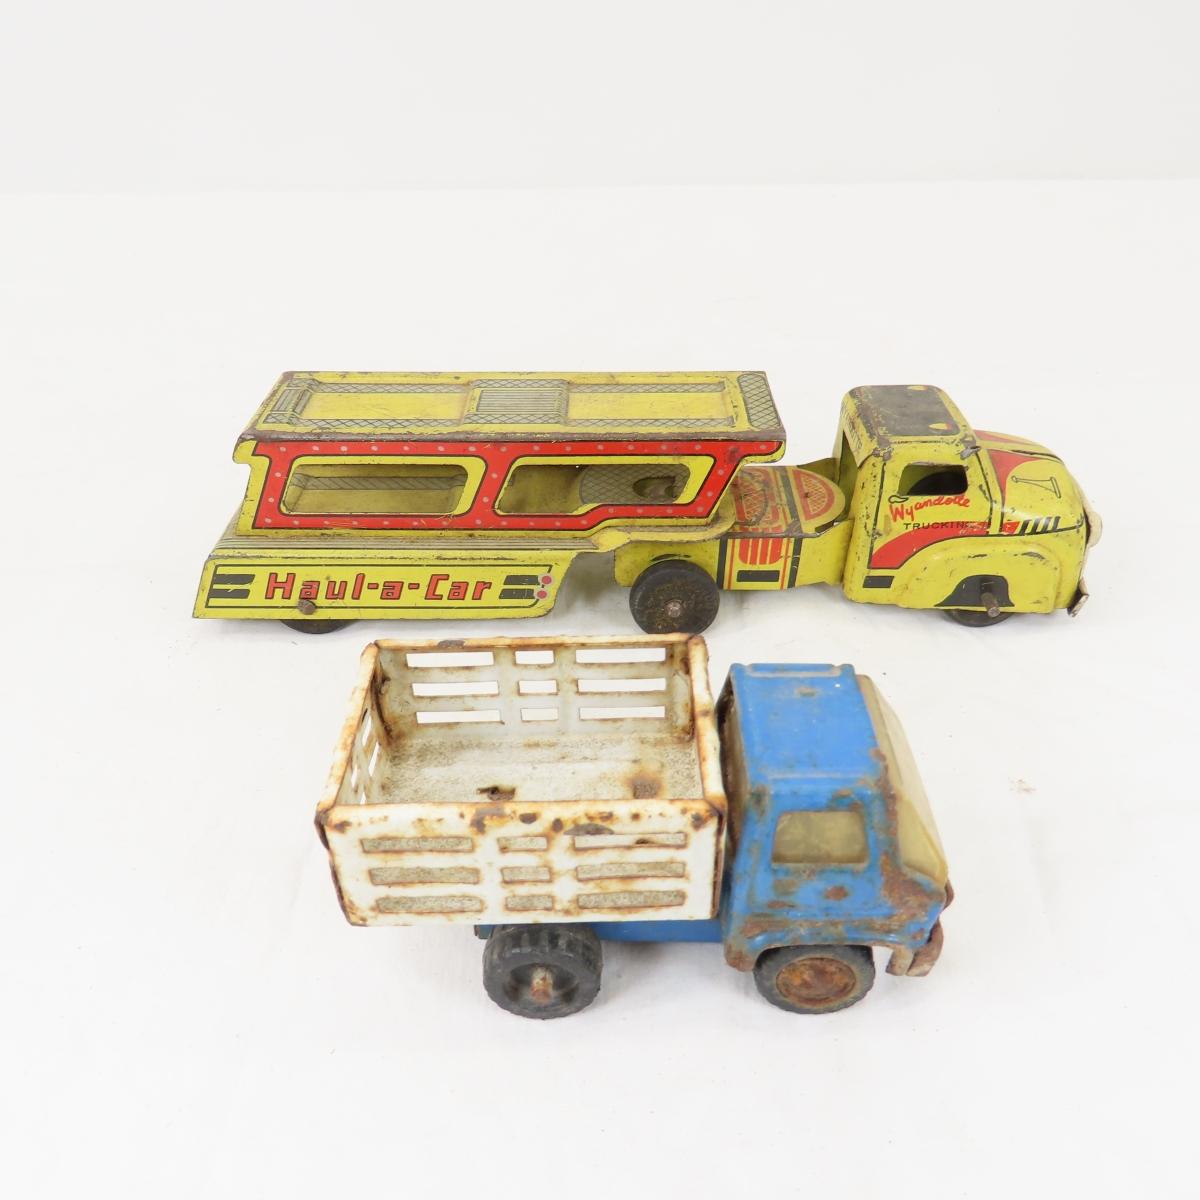 Vintage tin toys, 1st aid tins and play money